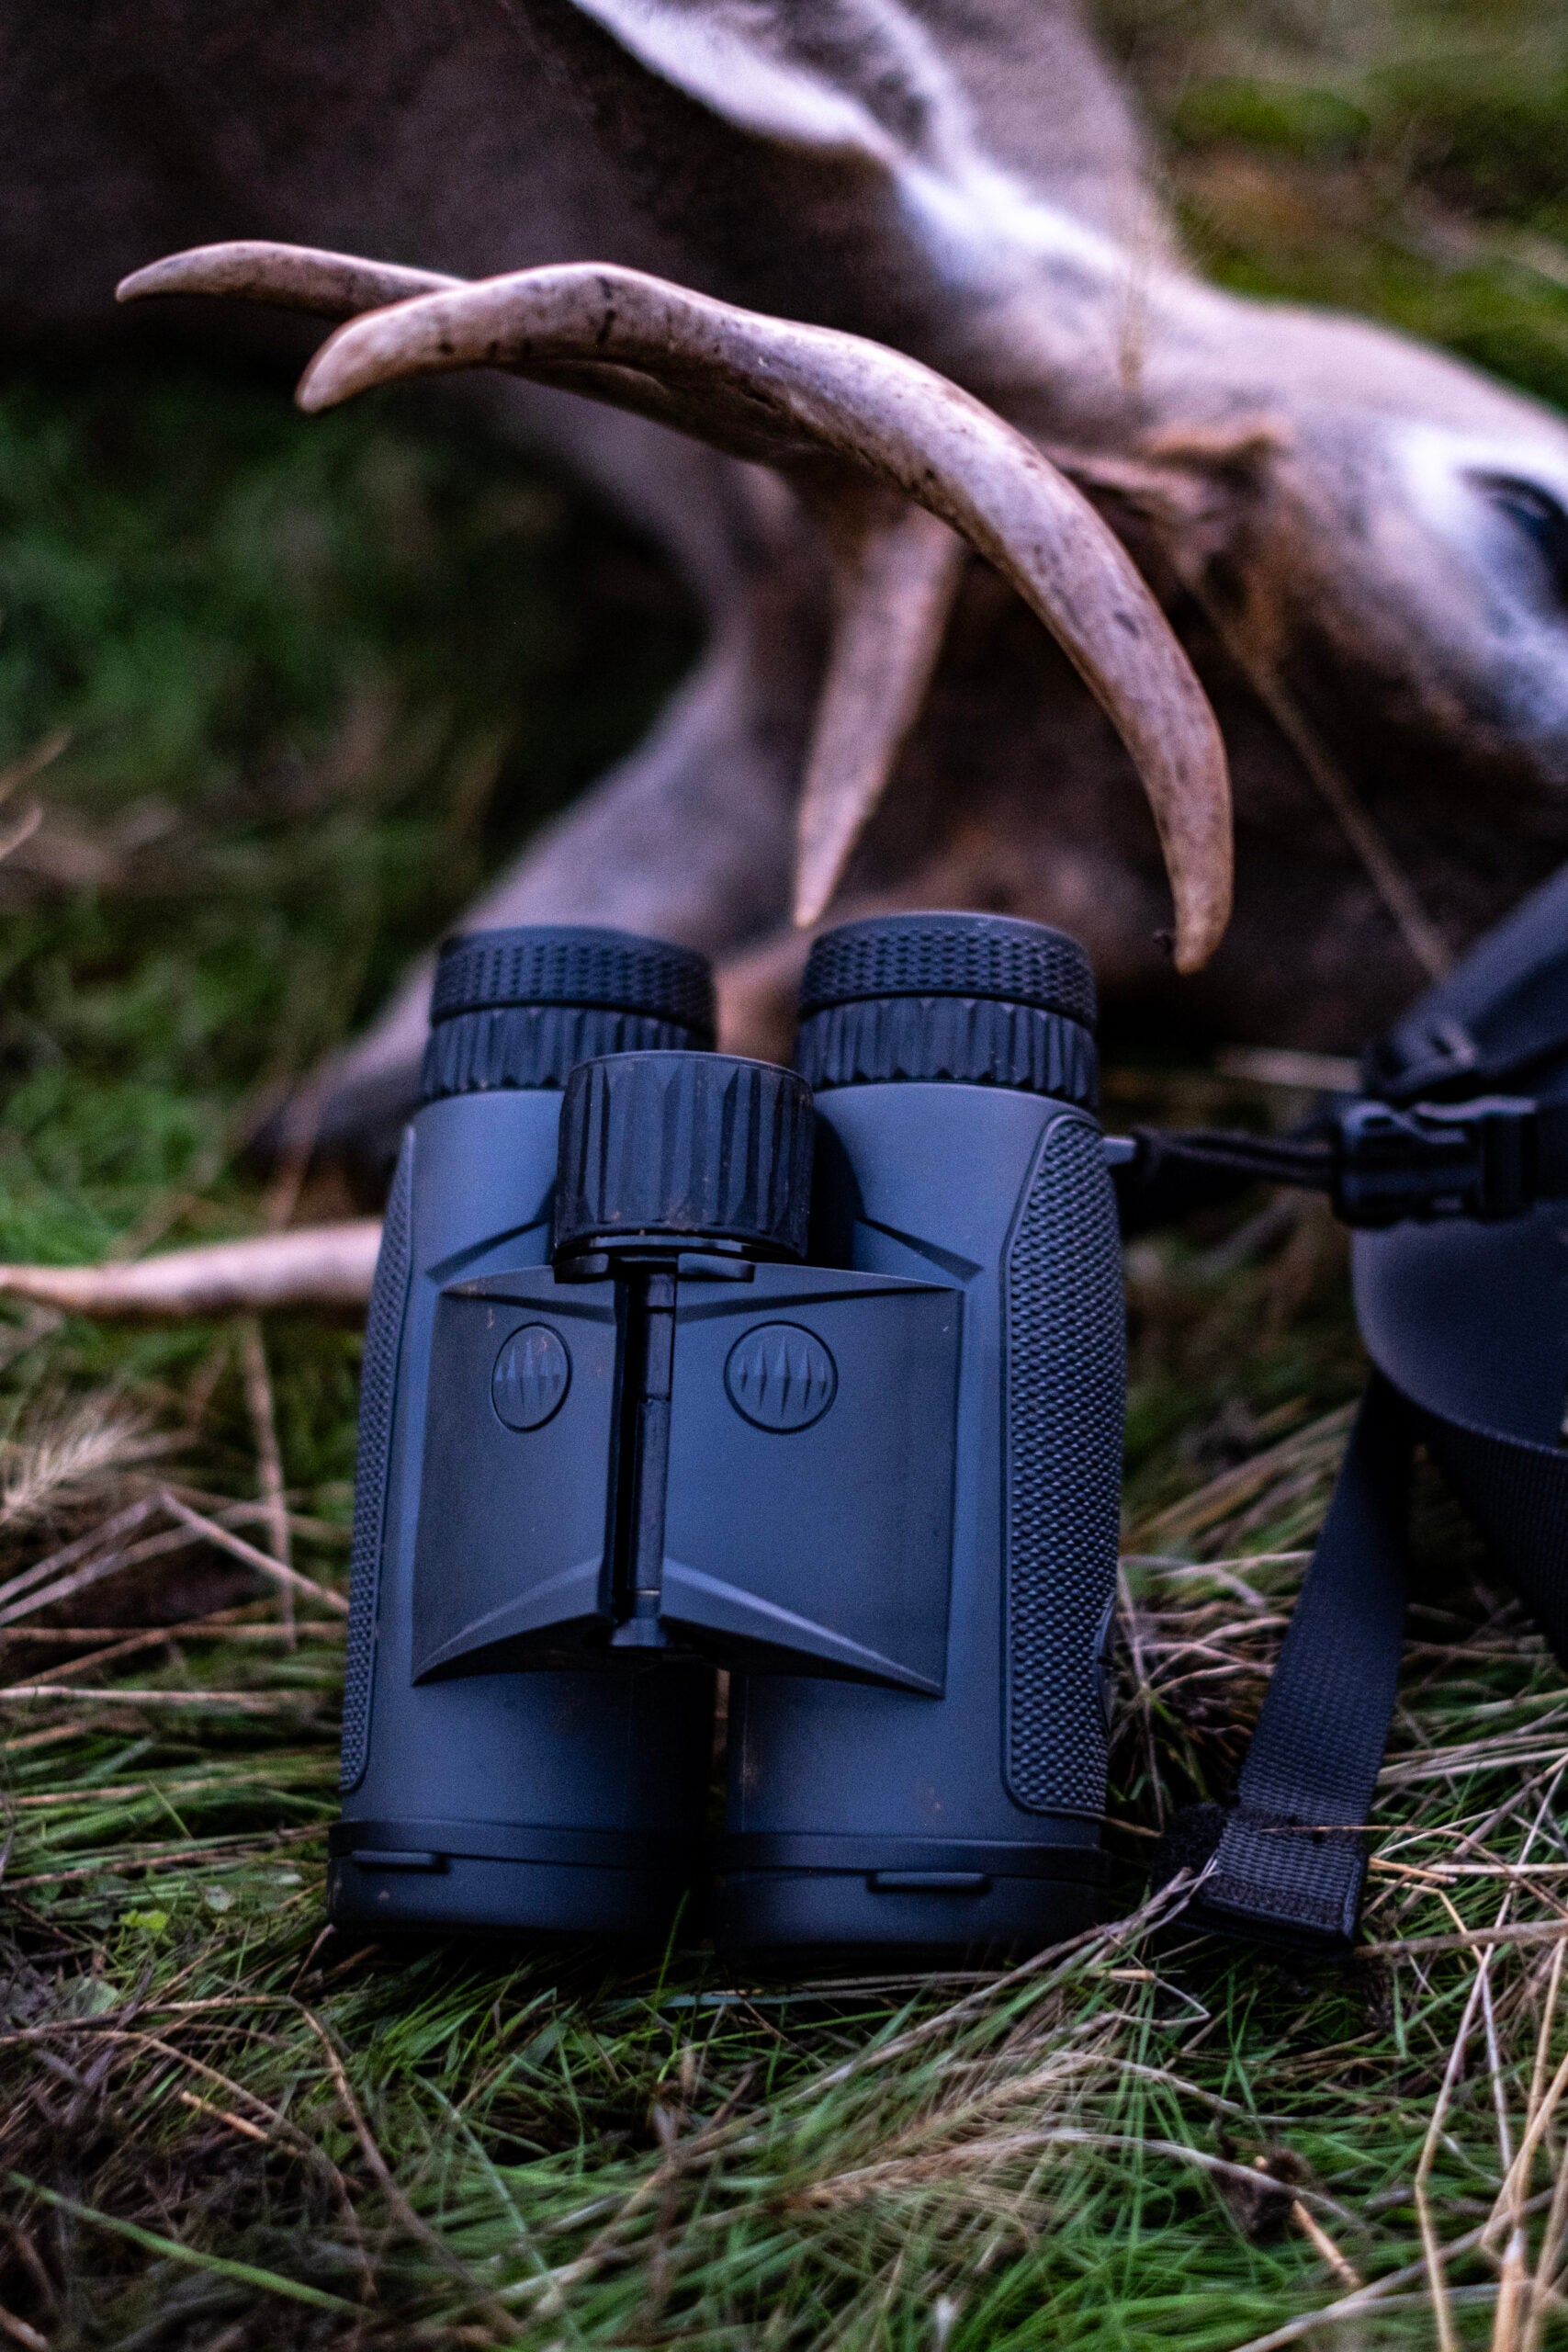 Leupold BX-4 Range HD binocular on the ground with harvested deer in the background